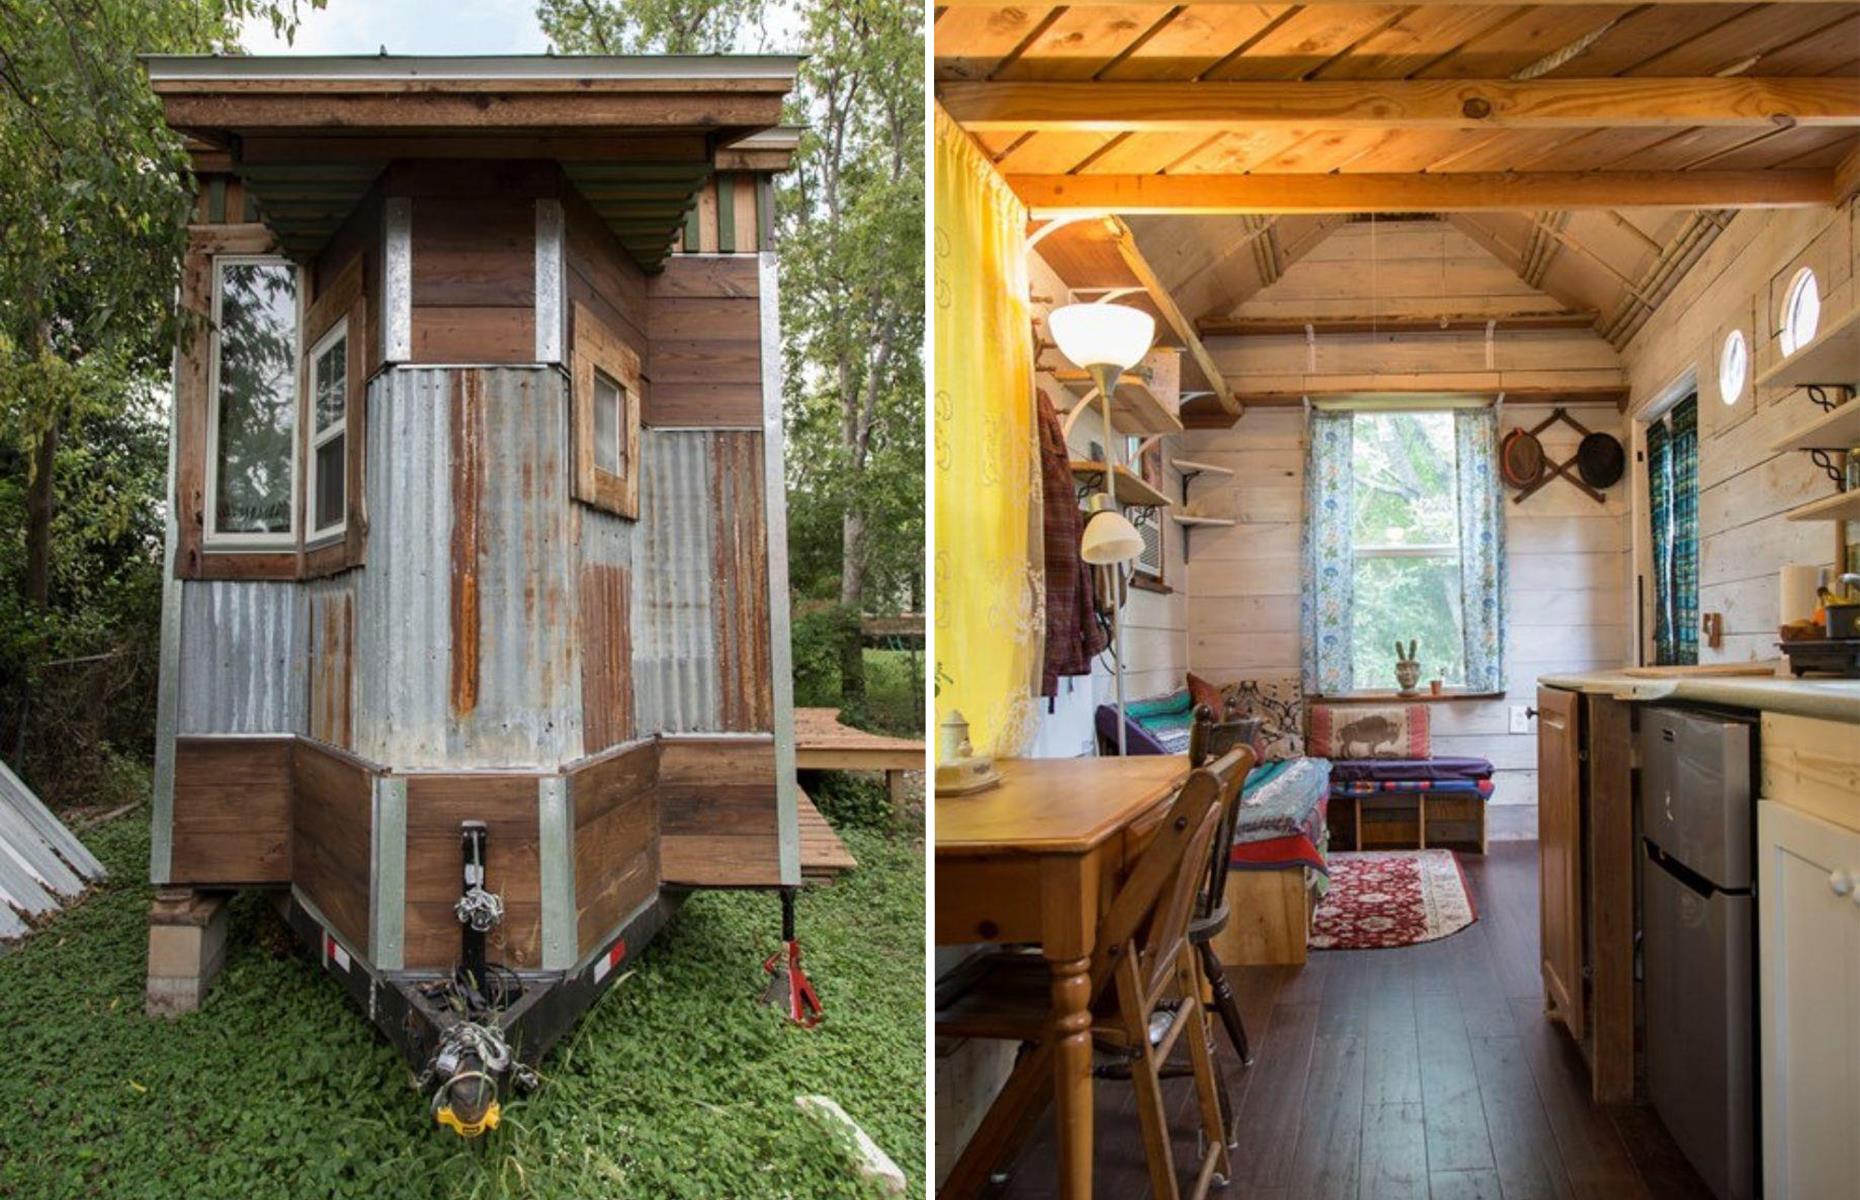 <p>The minute mobile home, nicknamed Cedar Haven, was built in 2016 from unusual reclaimed and natural materials, which include its tin siding and its attractive interior bamboo floors and ceiling. </p>